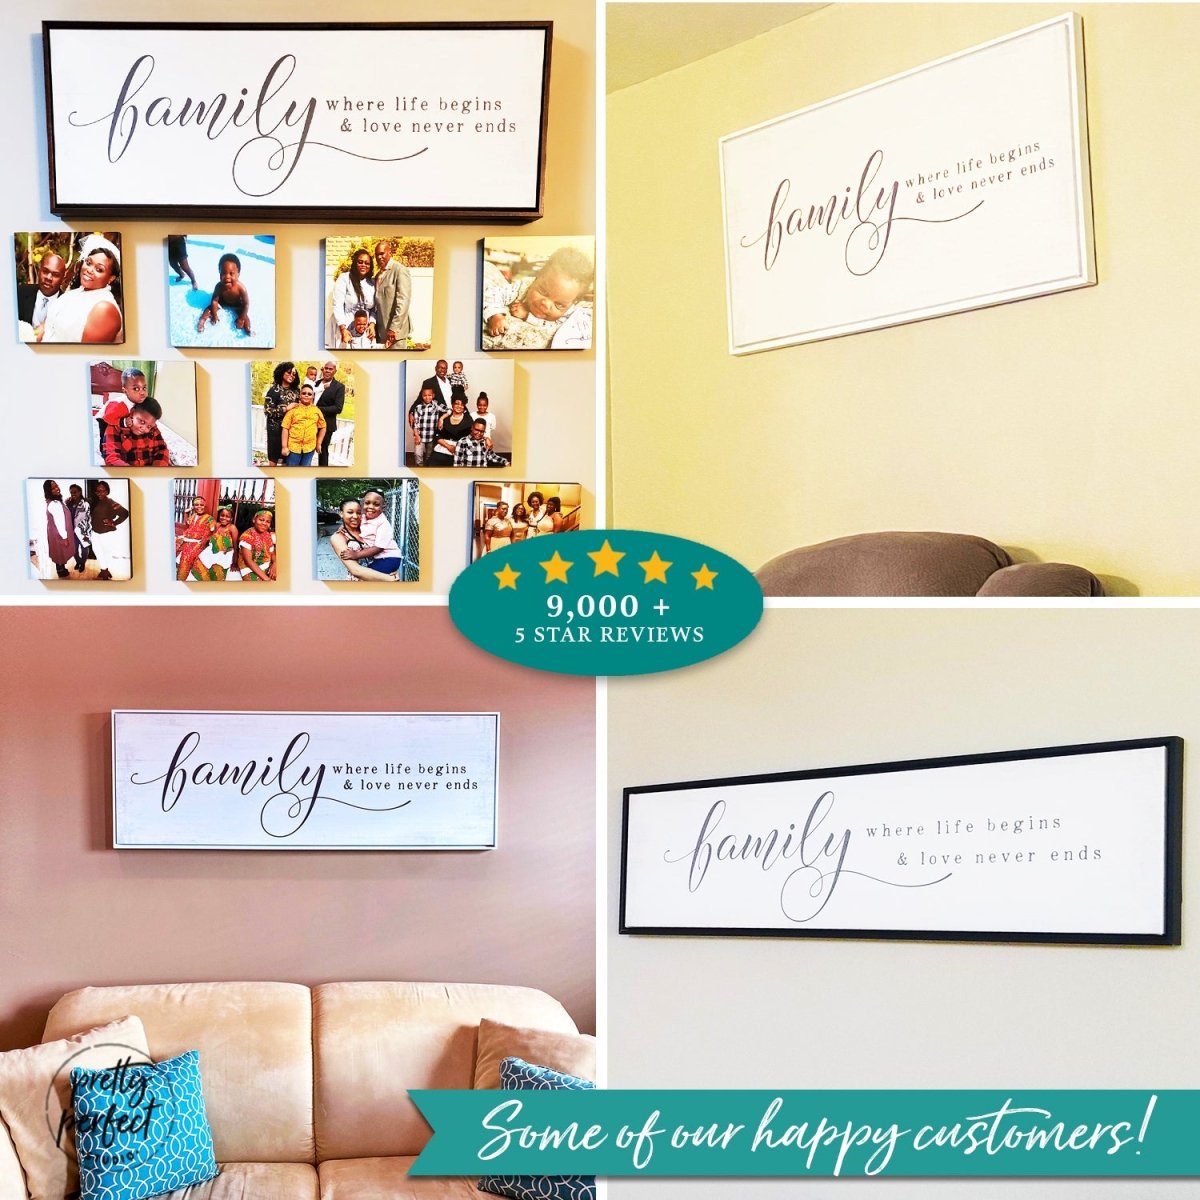 Customer product review for family where life begins and love never ends wall art by Pretty Perfect Studio